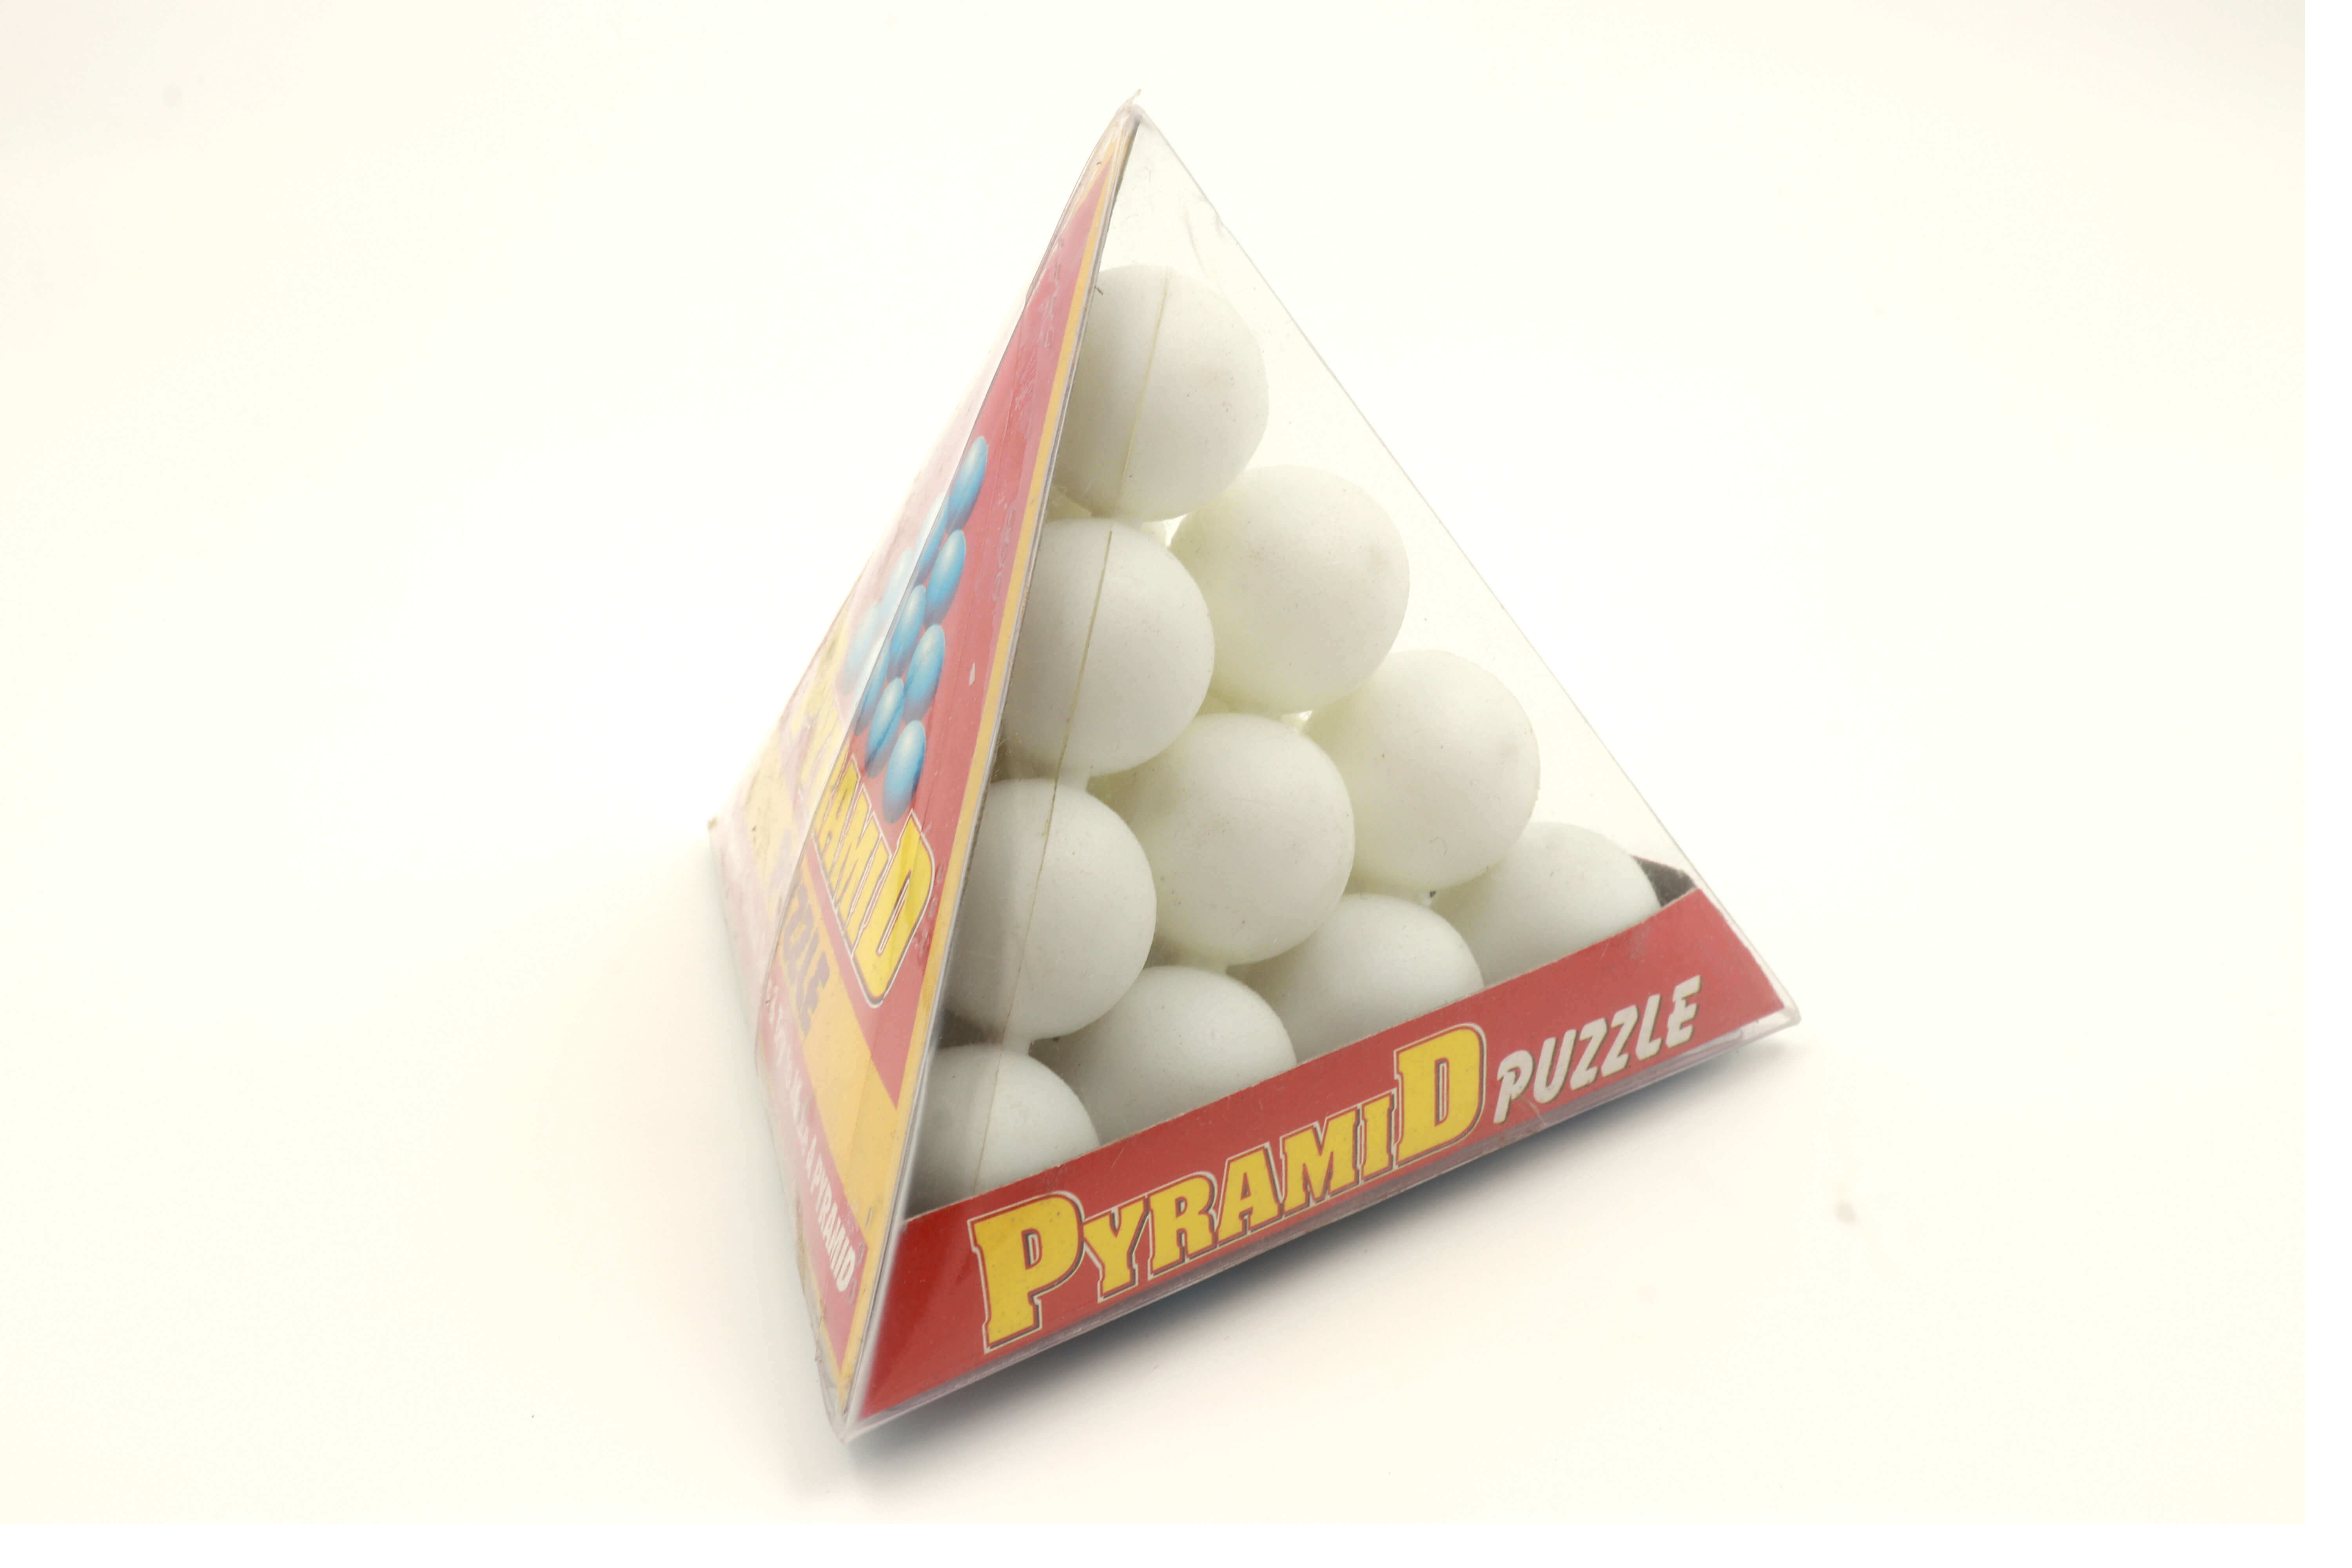 Pyramid Puzzle - Creative Fun Learning Toy for Boosting Imagination 